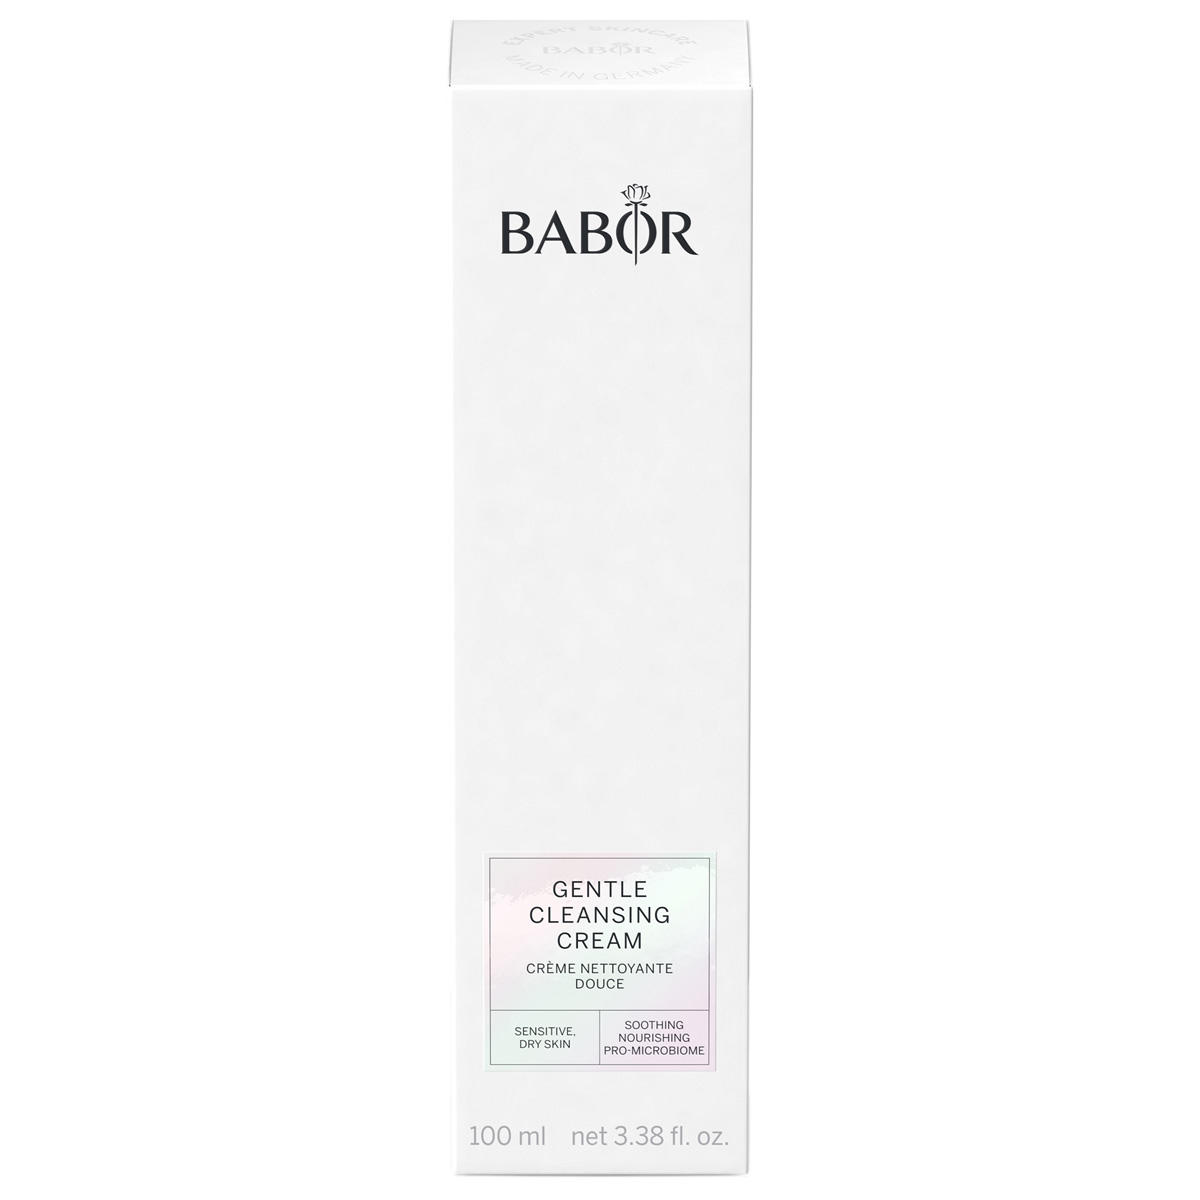 BABOR CLEANSING Gentle Cleansing Cream 100 ml - 2